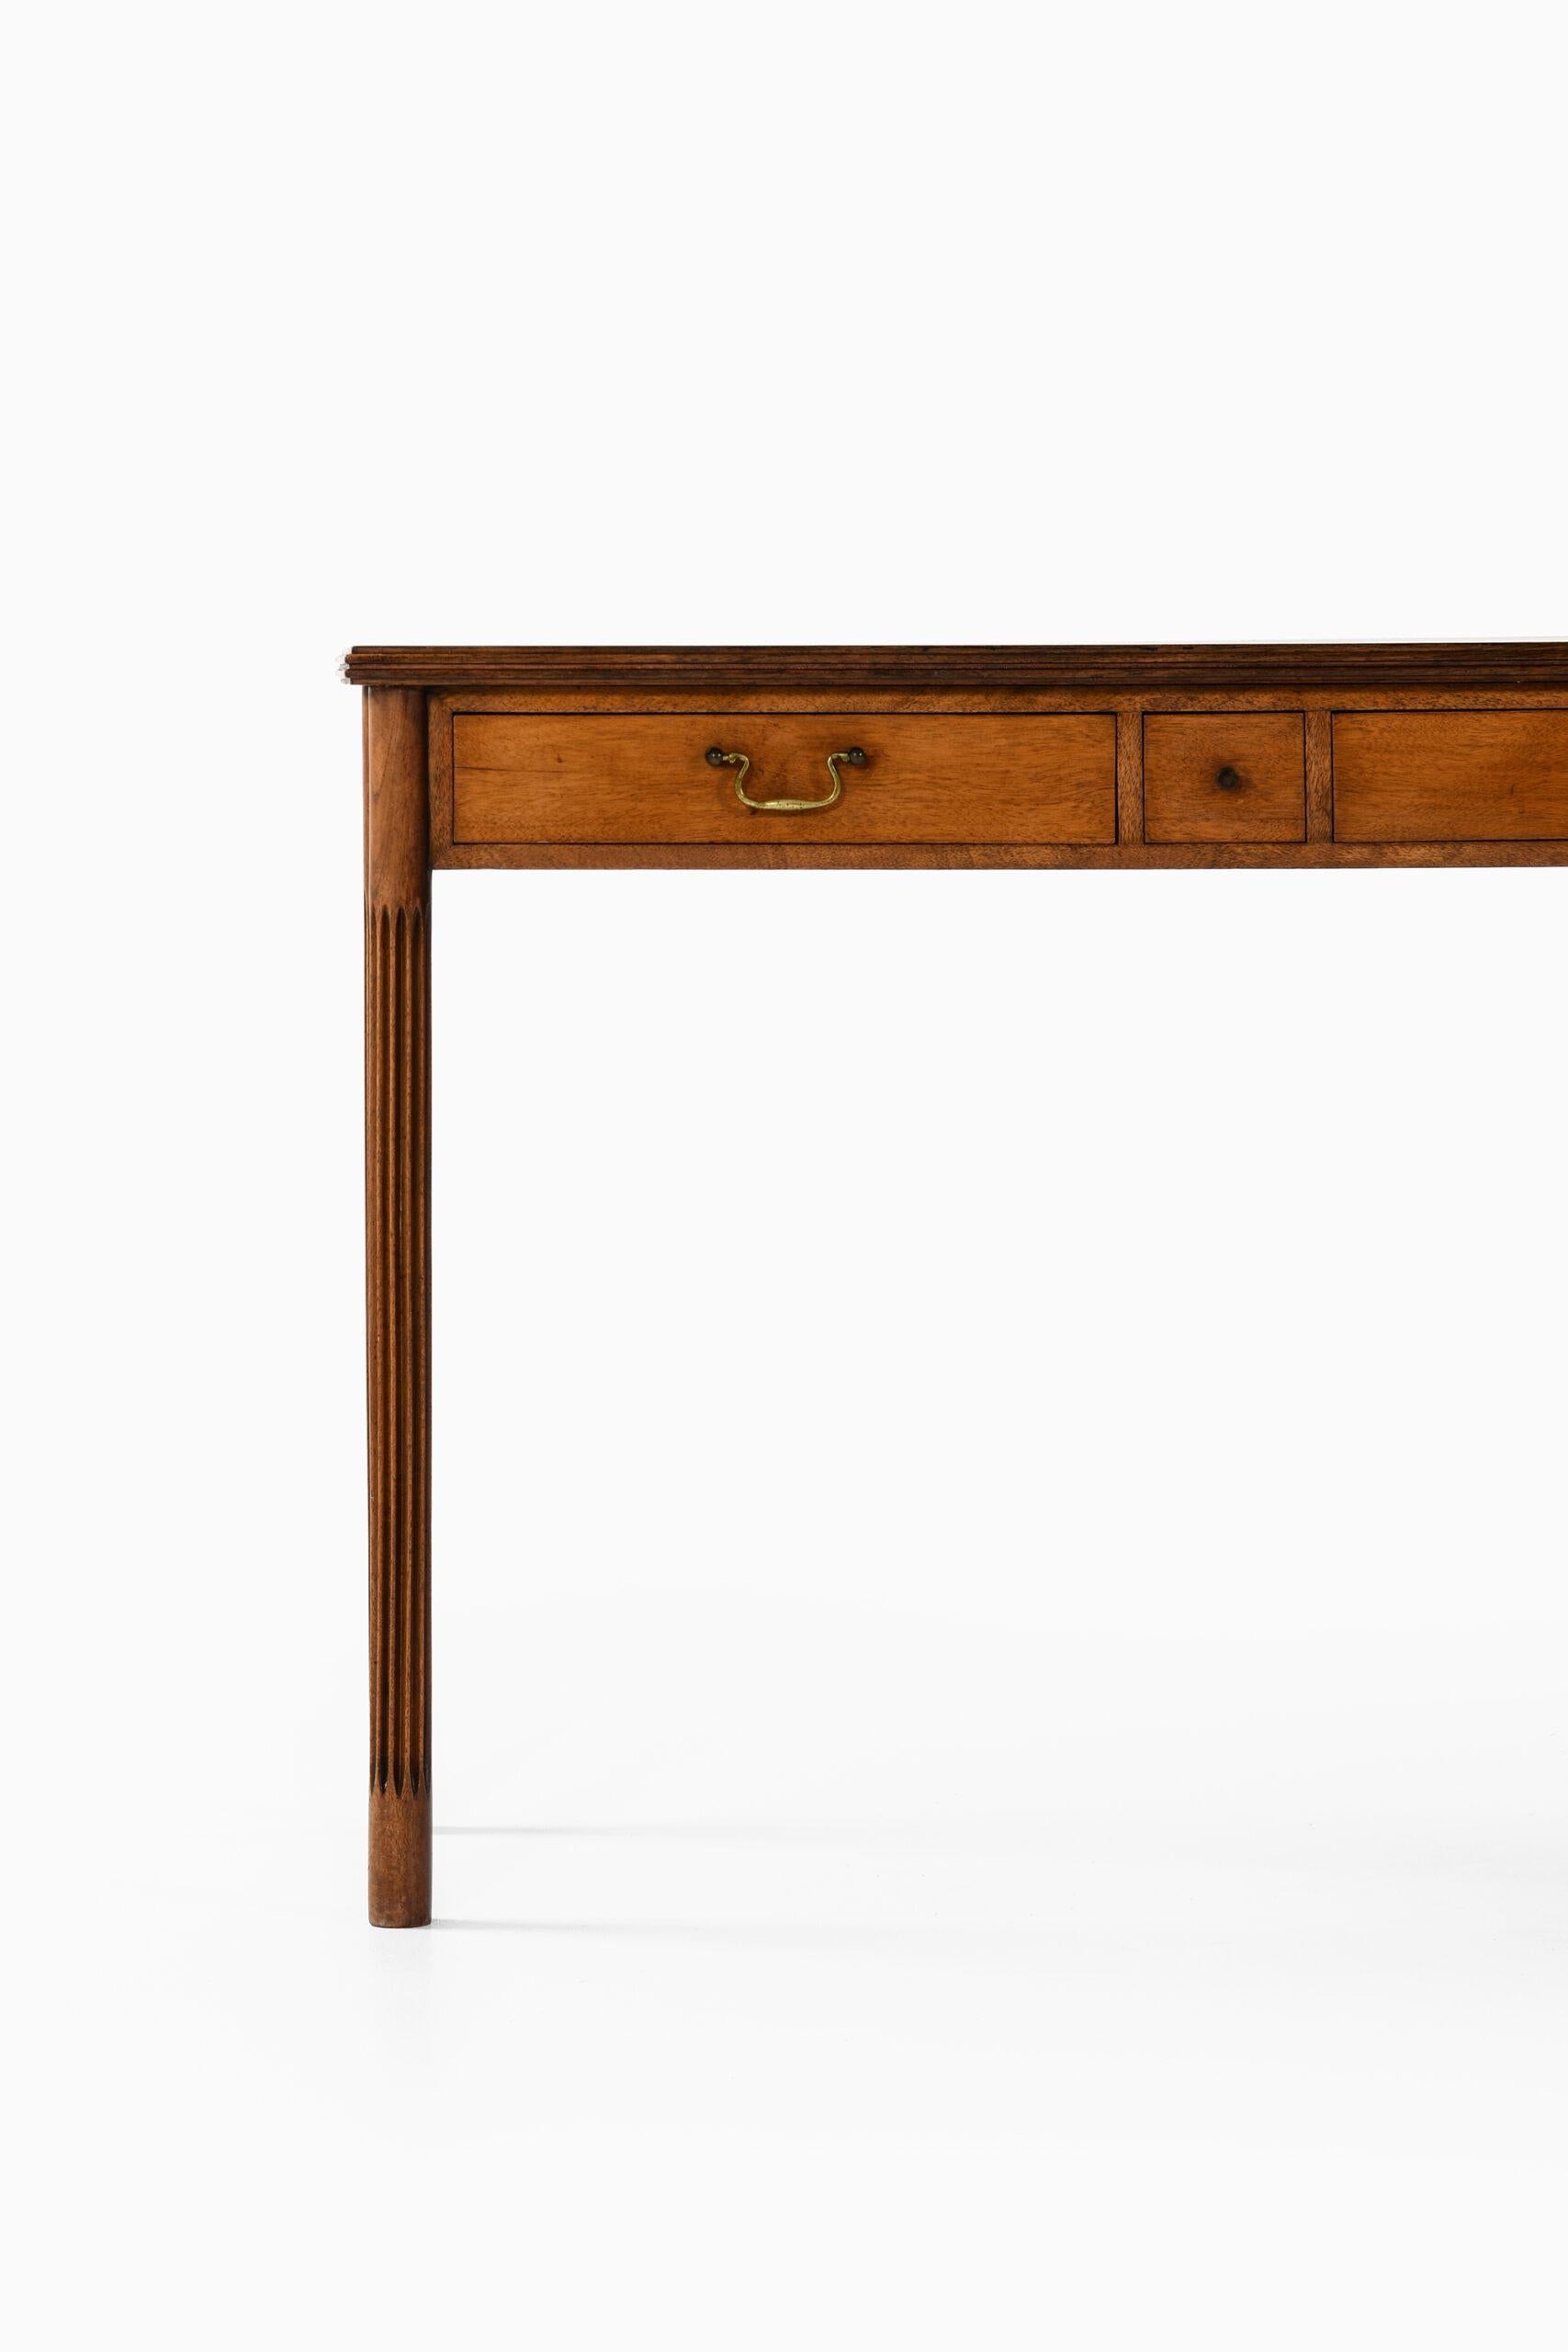 Rare console table / sideboard by unknown designer. Produced in Denmark.